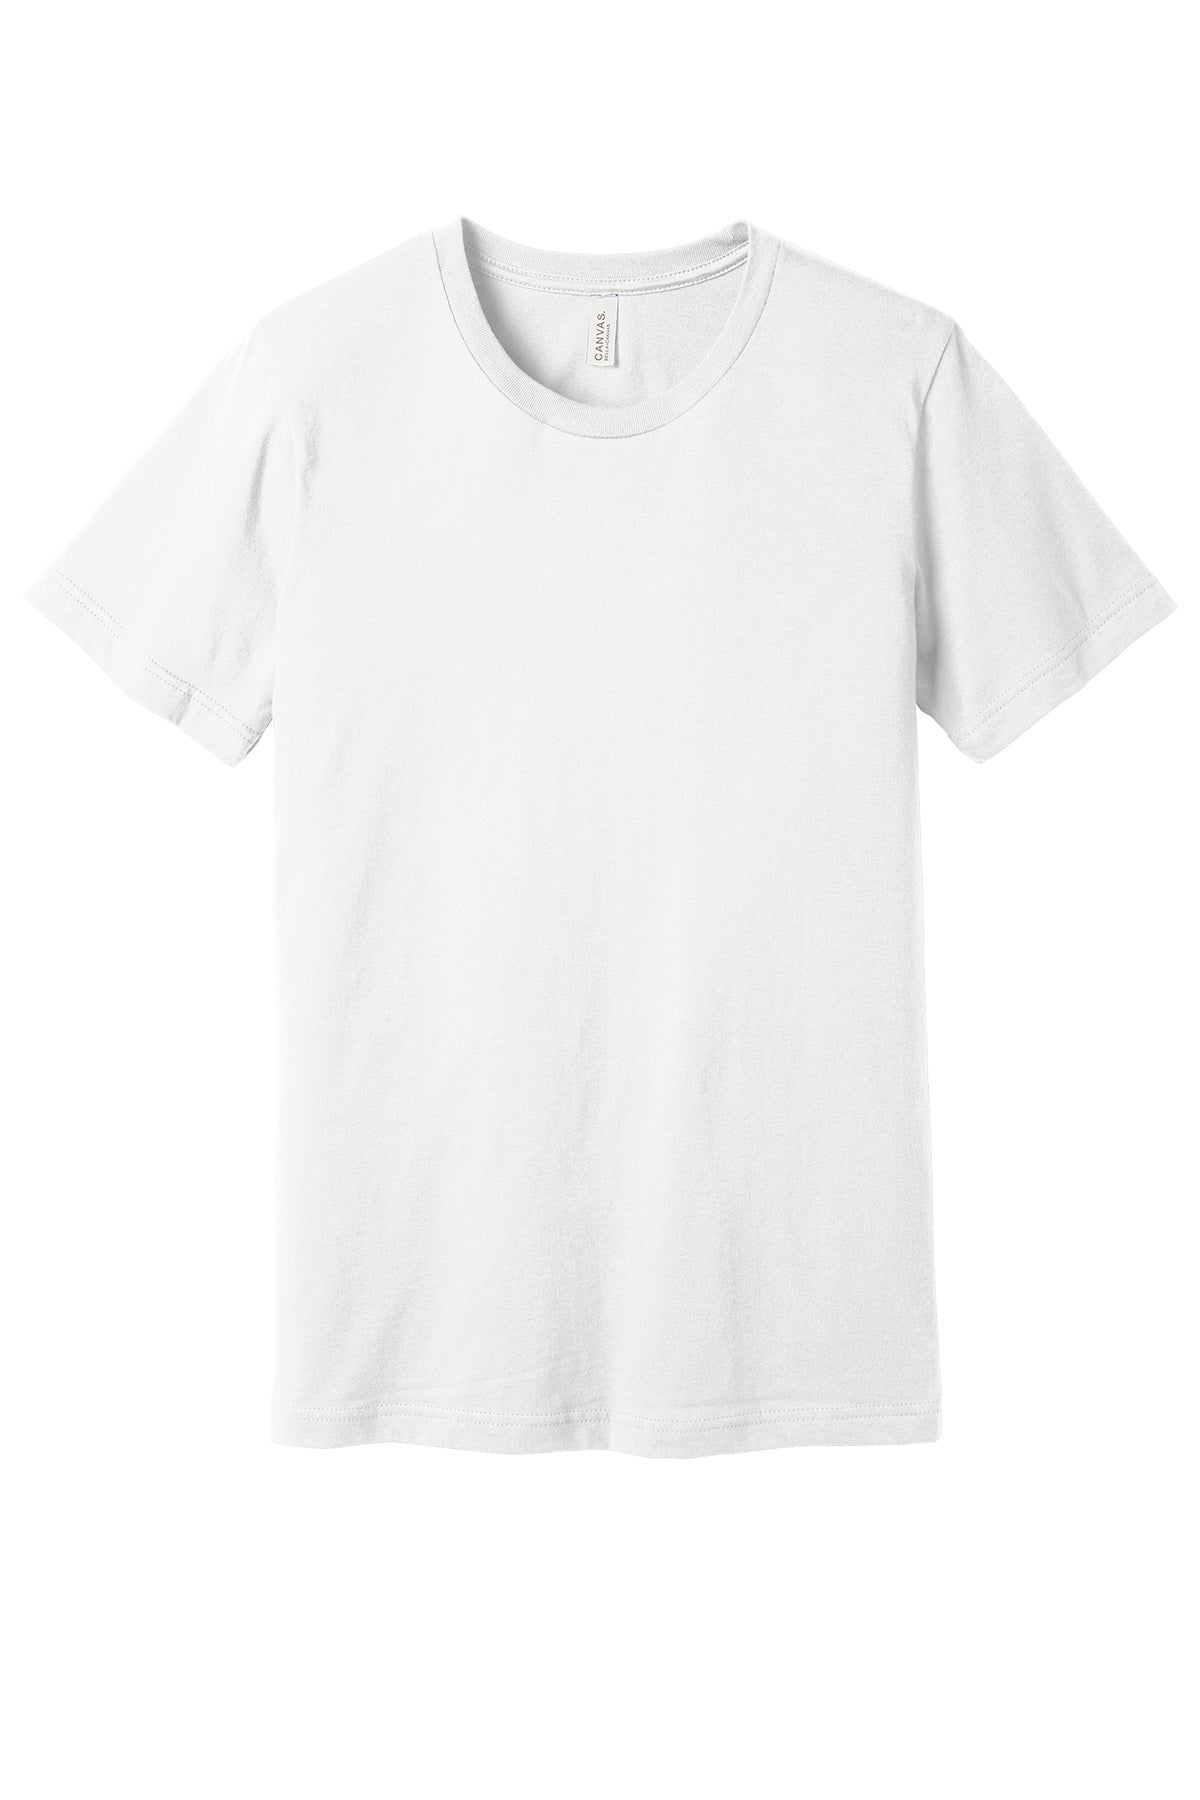 Bella+Canvas Bc3001 Adult T-Shirt Ad Small / White